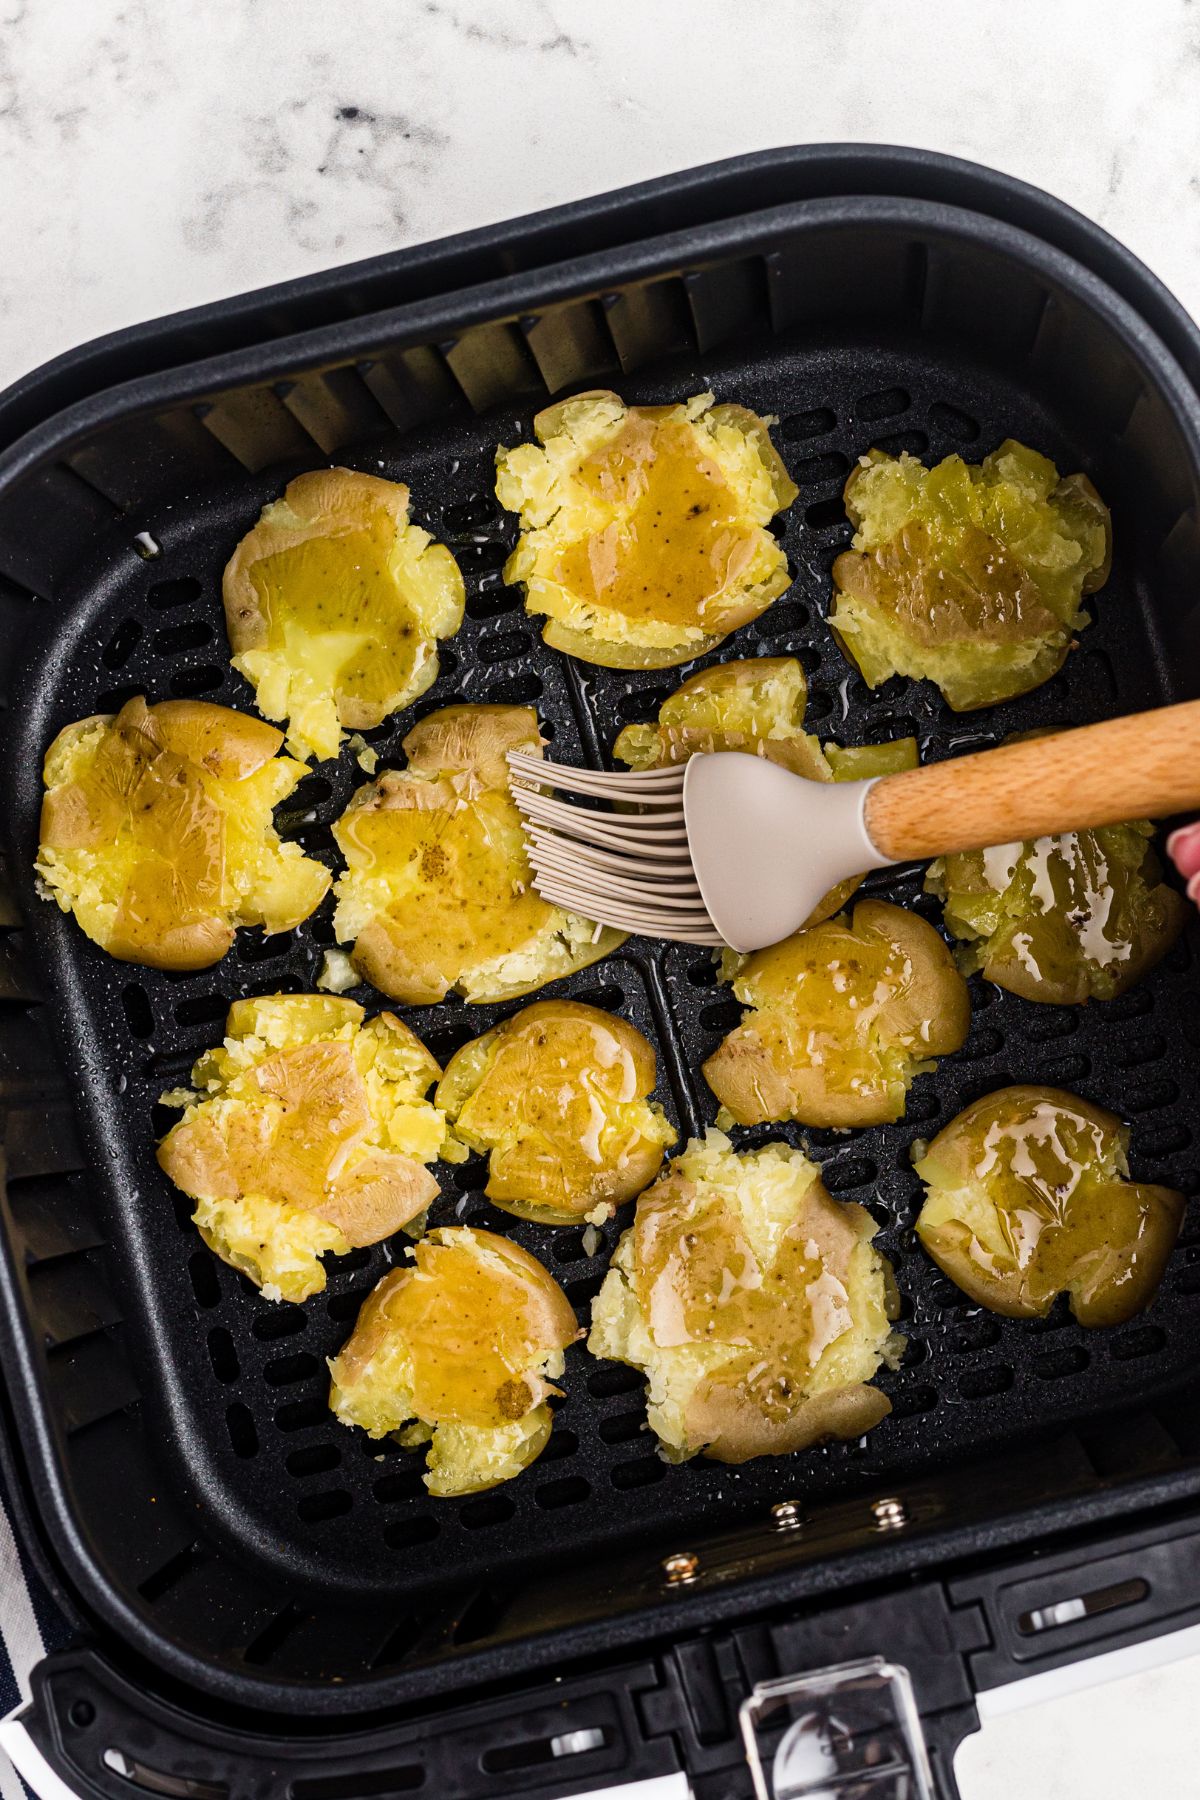 Smashed golden baby potatoes in the air fryer basket being brushed with olive oil and seasoned